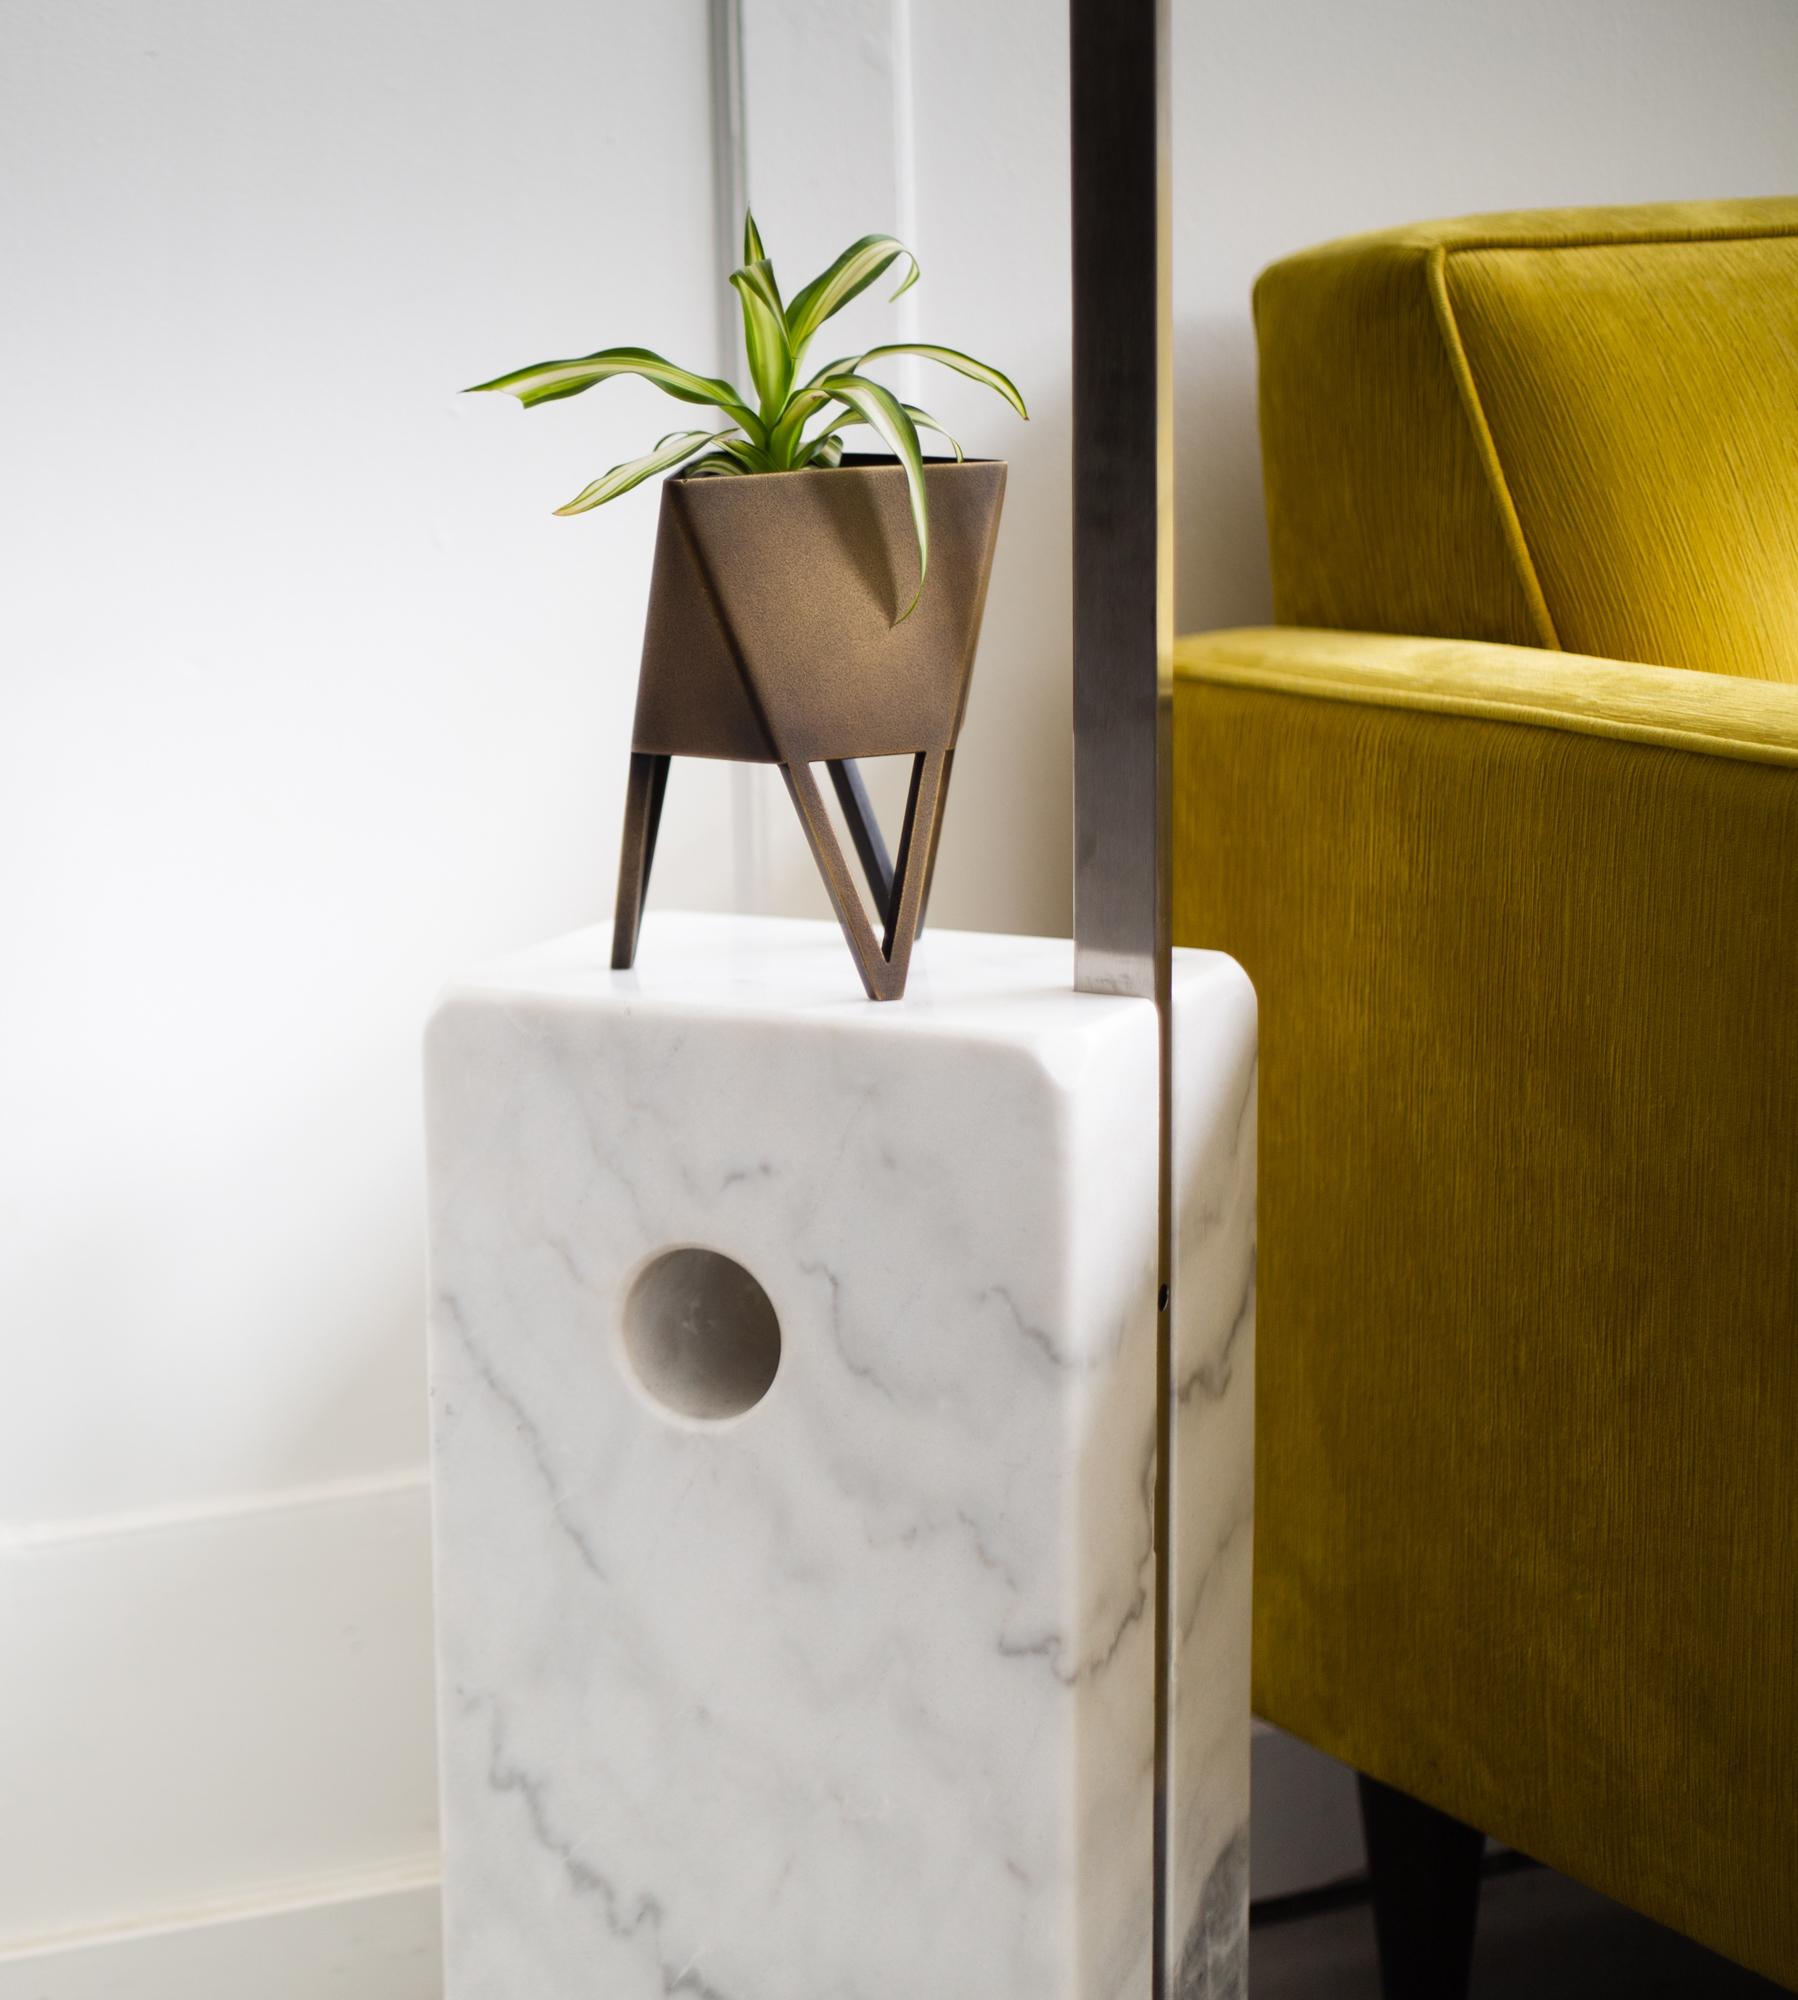 Force/Collide's award-winning signature planter is an ongoing production available in multiple colors and sizes. This original design is a nod to playful perspectives and spatial relationships. Proportions are thoughtful in aesthetic while